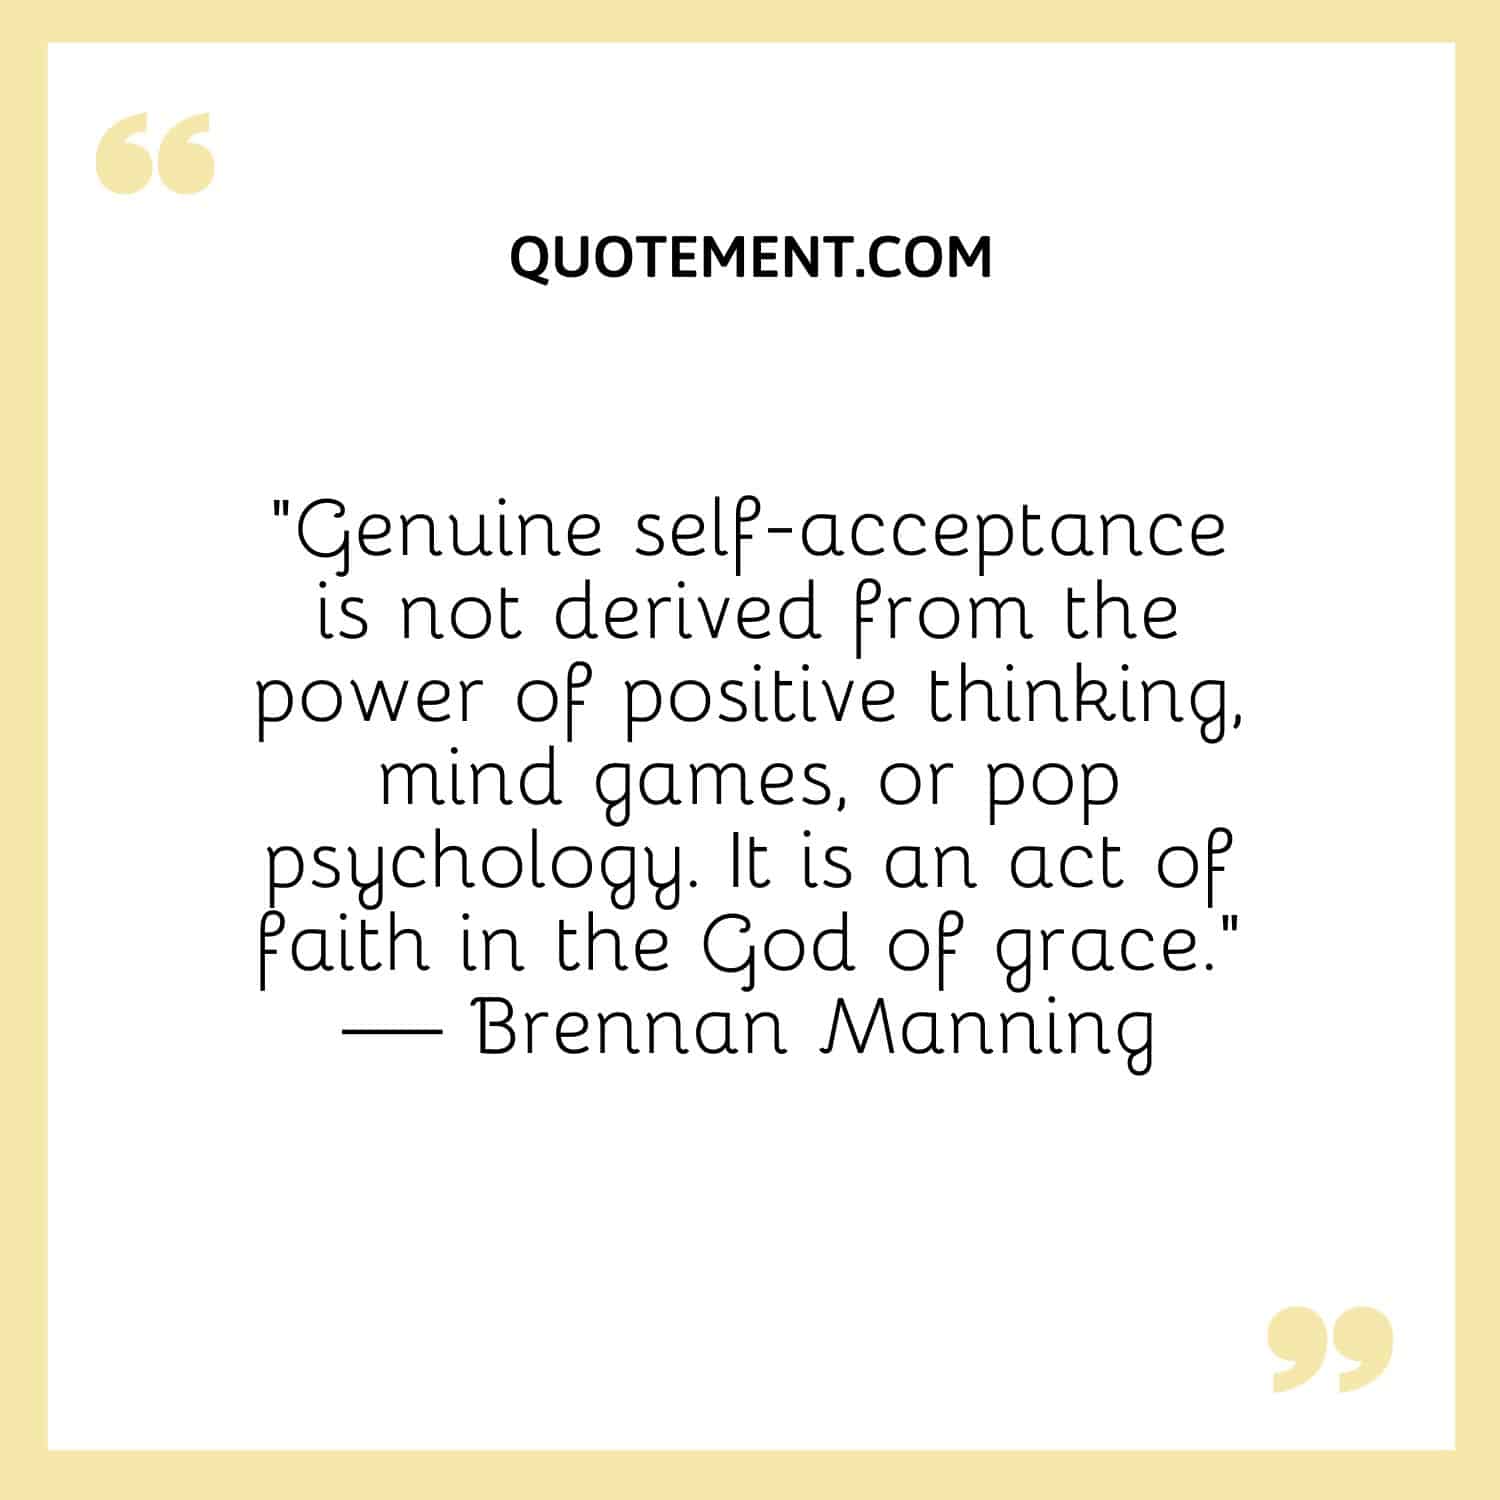 Genuine self-acceptance is not derived from the power of positive thinking, mind games, or pop psychology